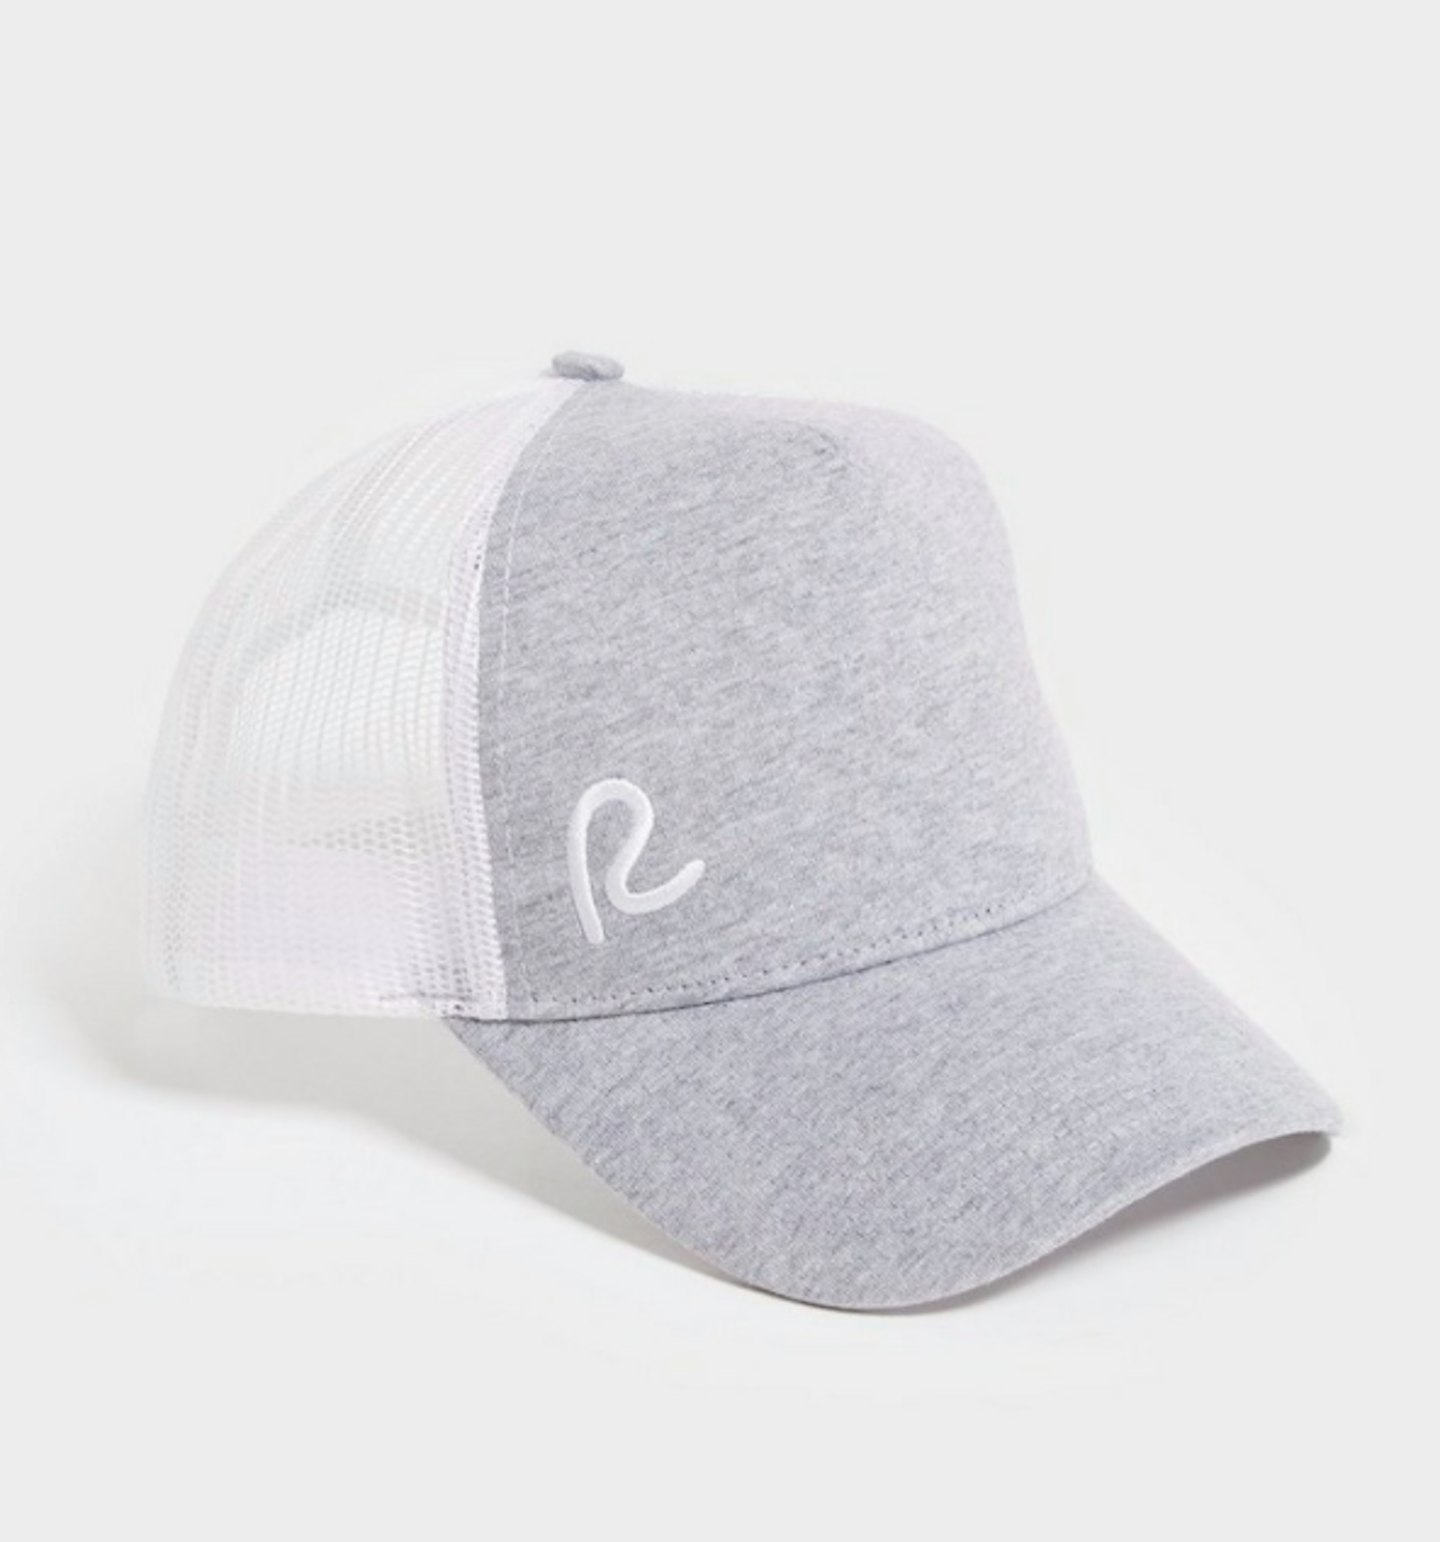 Check out the R brand hats from Love Island - Grazia